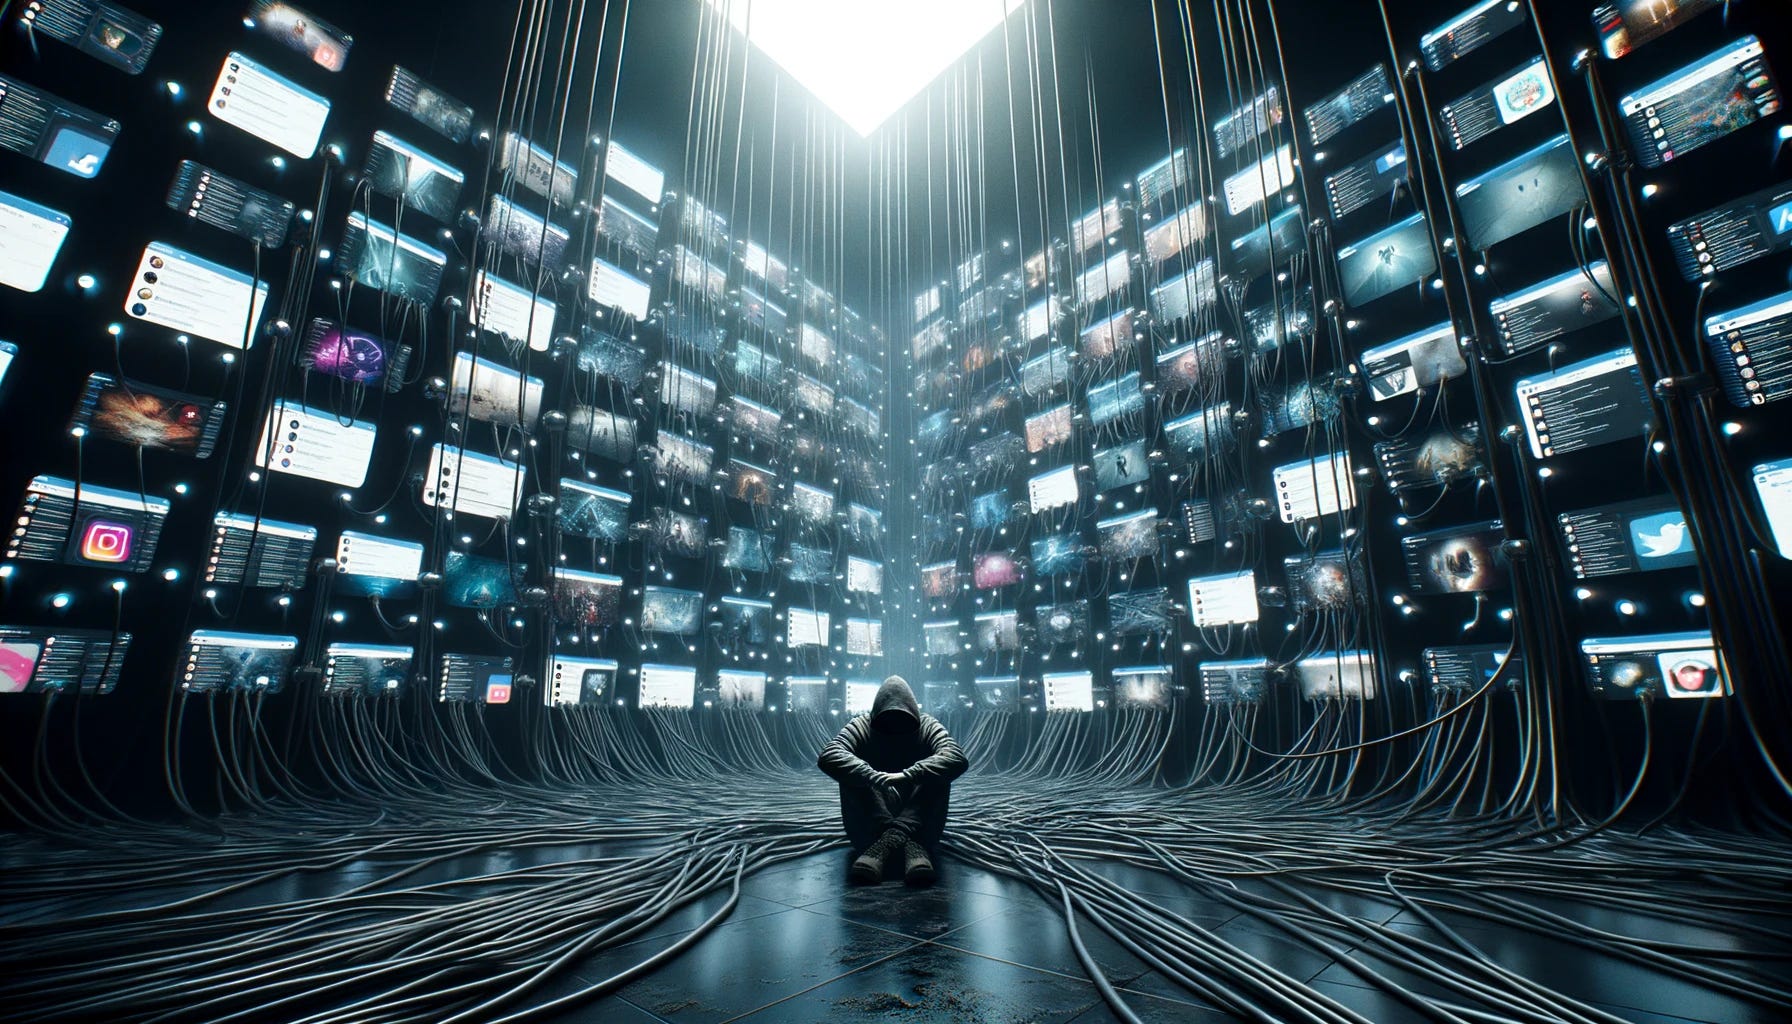 In a bleak futuristic setting, the overwhelming power of social media is evident. Inside a dimly lit room, walls are alive with the glow of various social media feeds. A solitary individual, connected by numerous cables, sits in despair, symbolizing humanity's entrapment in the digital realm.